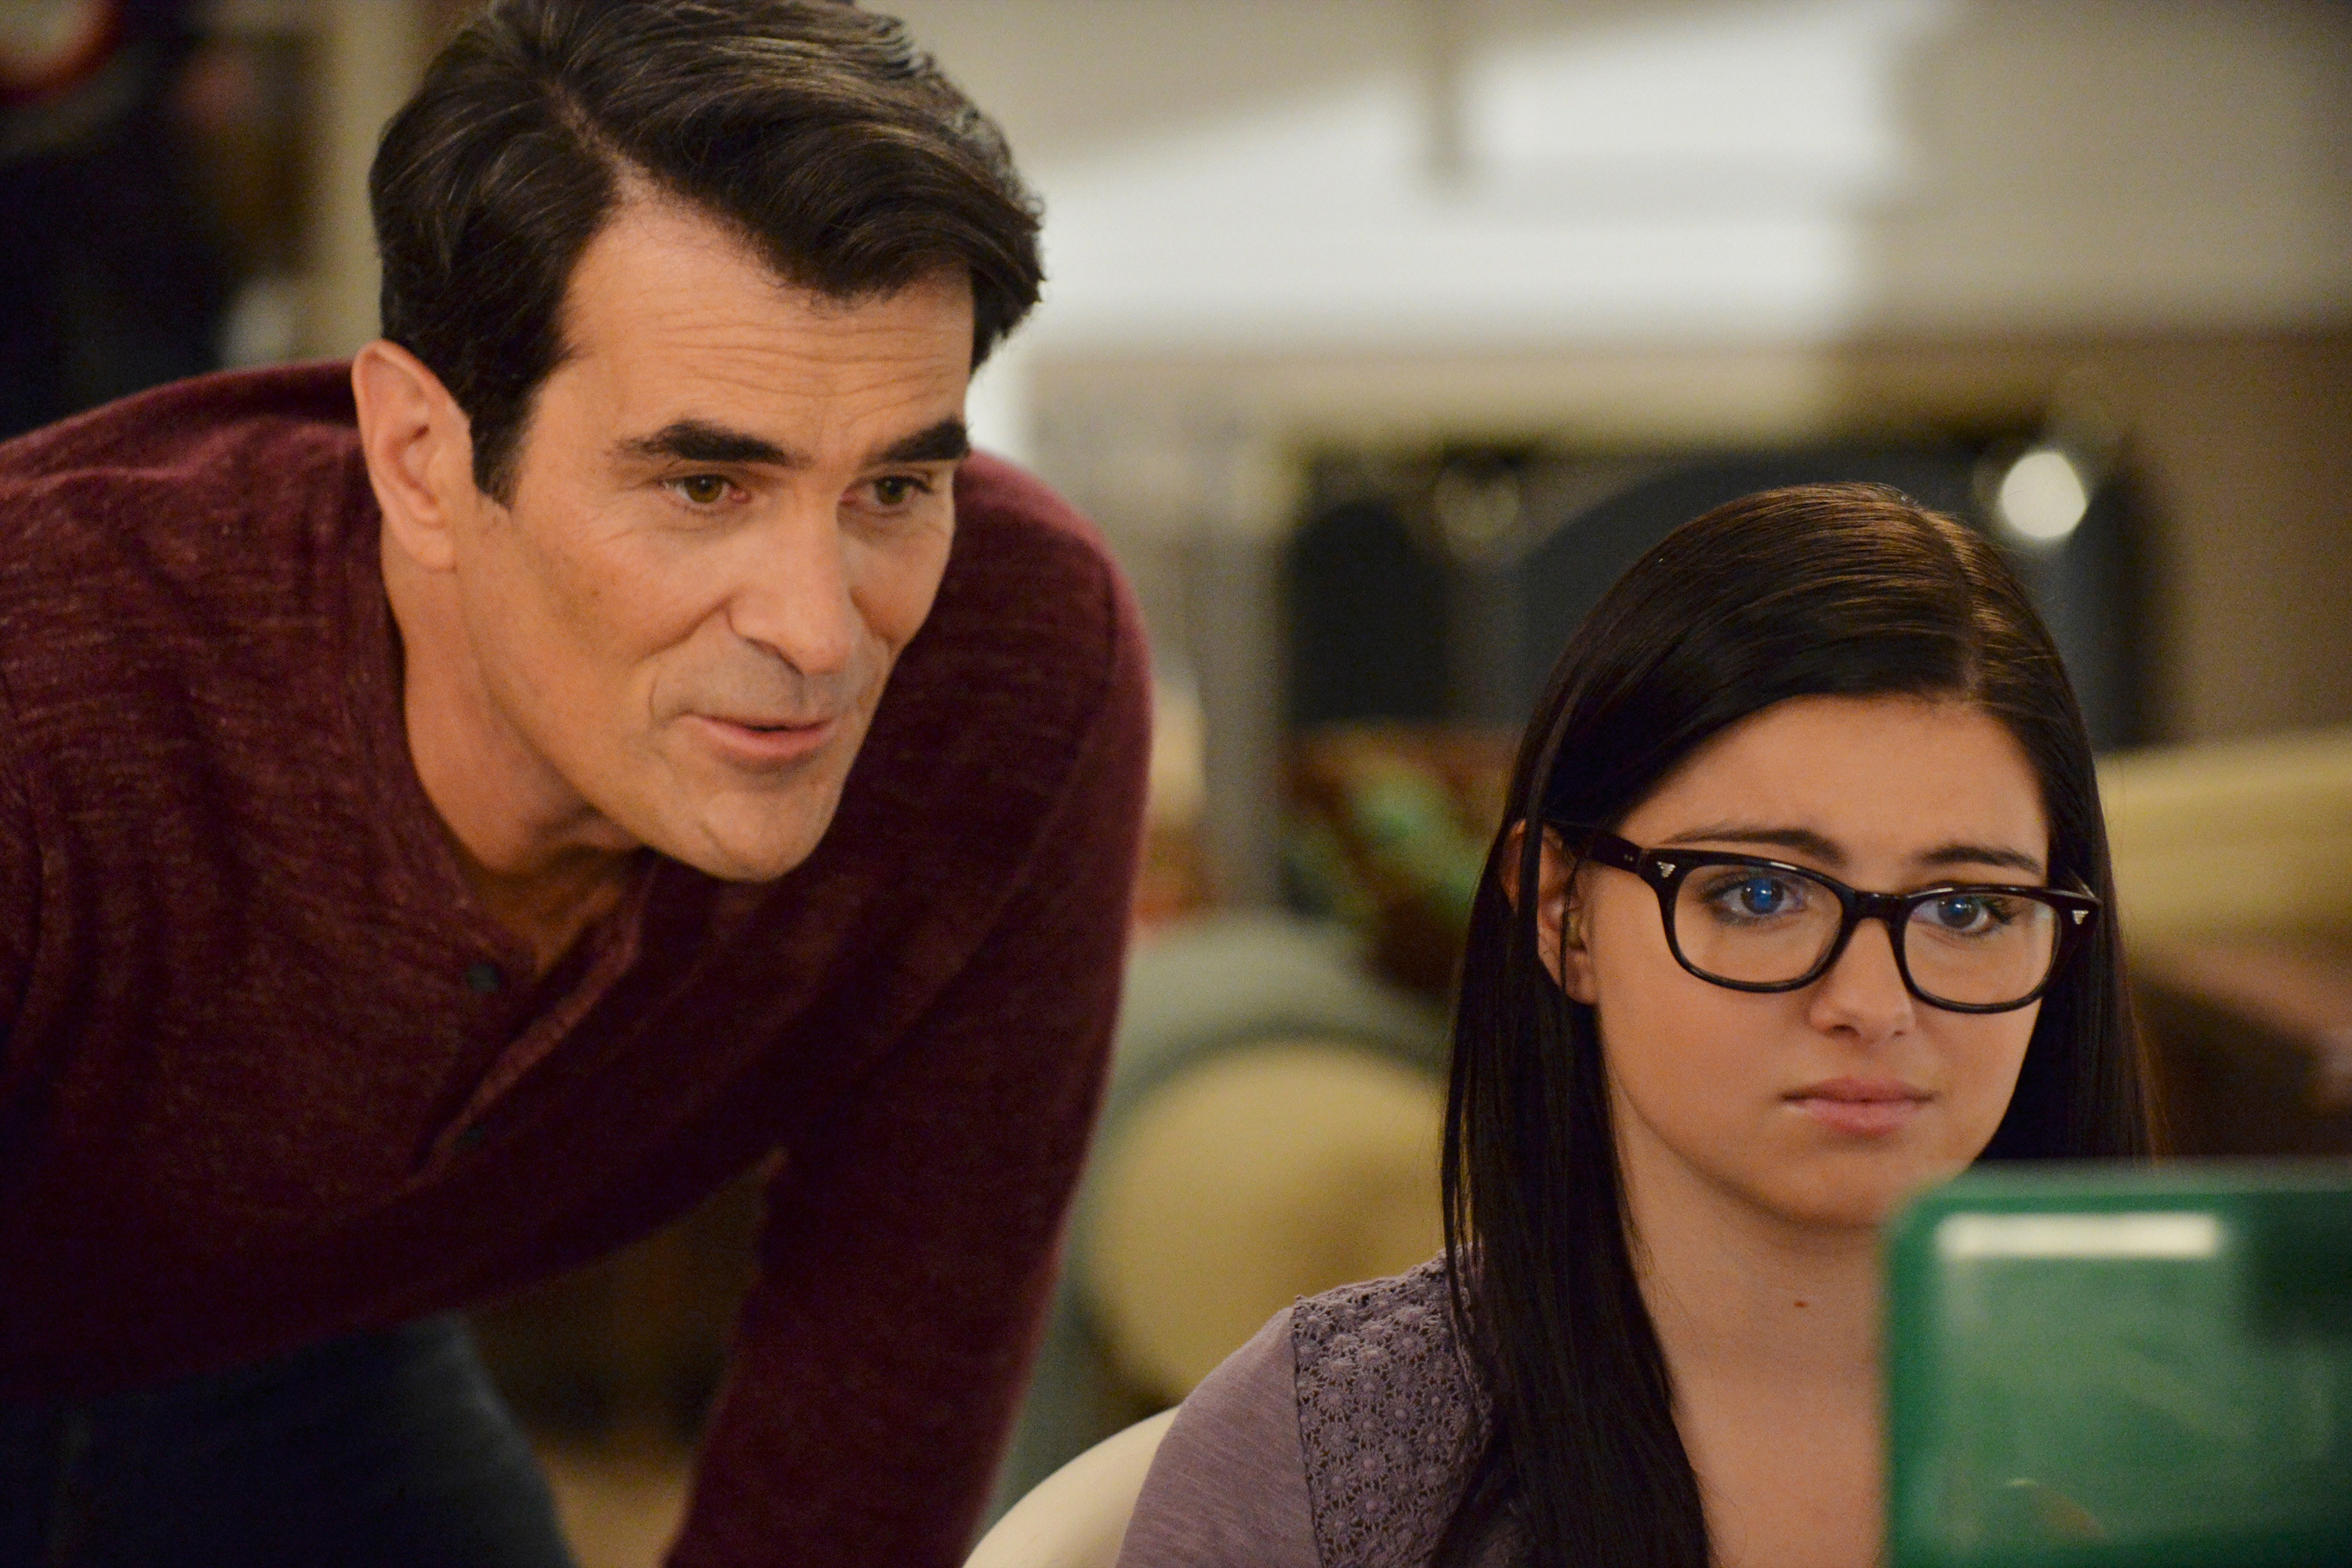 Ariel as Alex Dunphy with her dad Phil Dunphy standing beside her